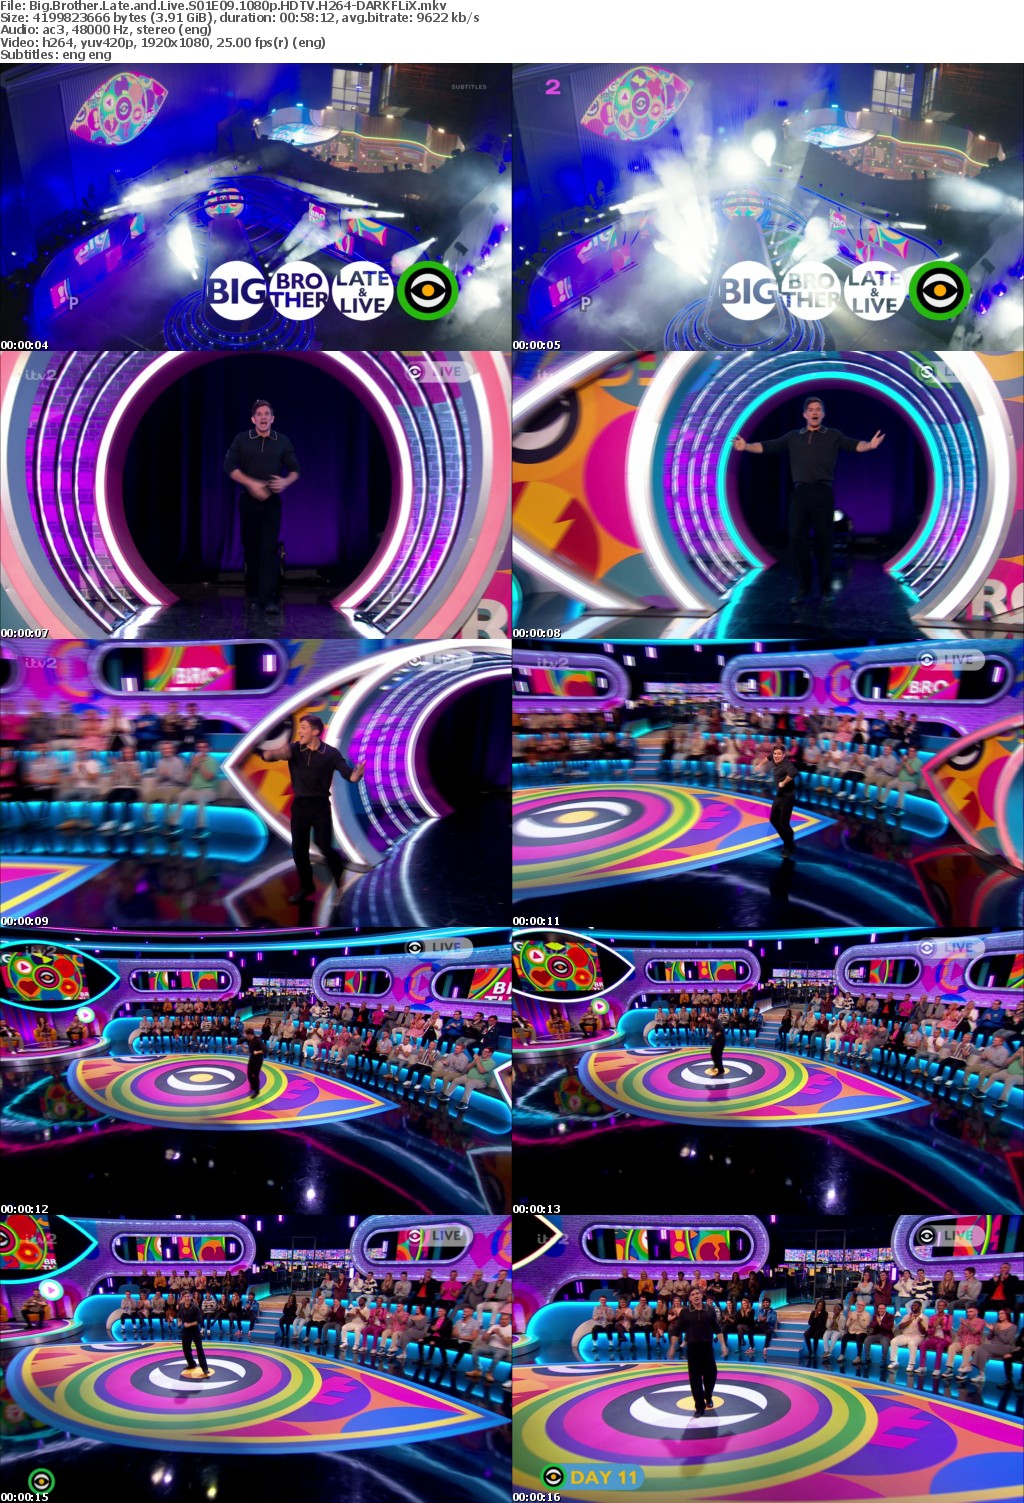 Big Brother Late and Live S01E09 1080p HDTV H264-DARKFLiX